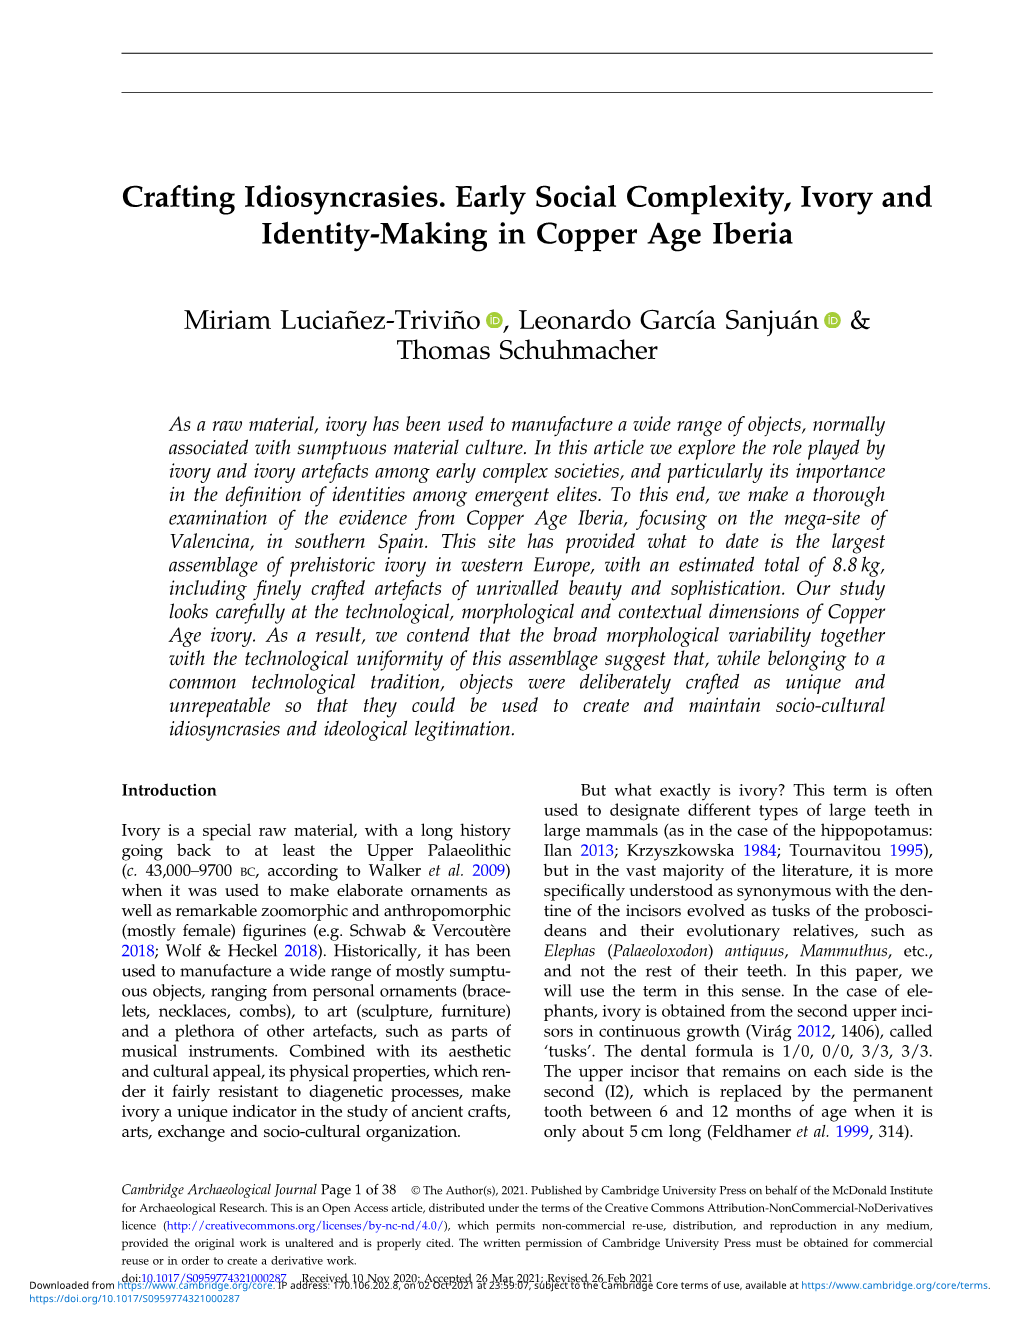 Crafting Idiosyncrasies. Early Social Complexity, Ivory and Identity-Making in Copper Age Iberia